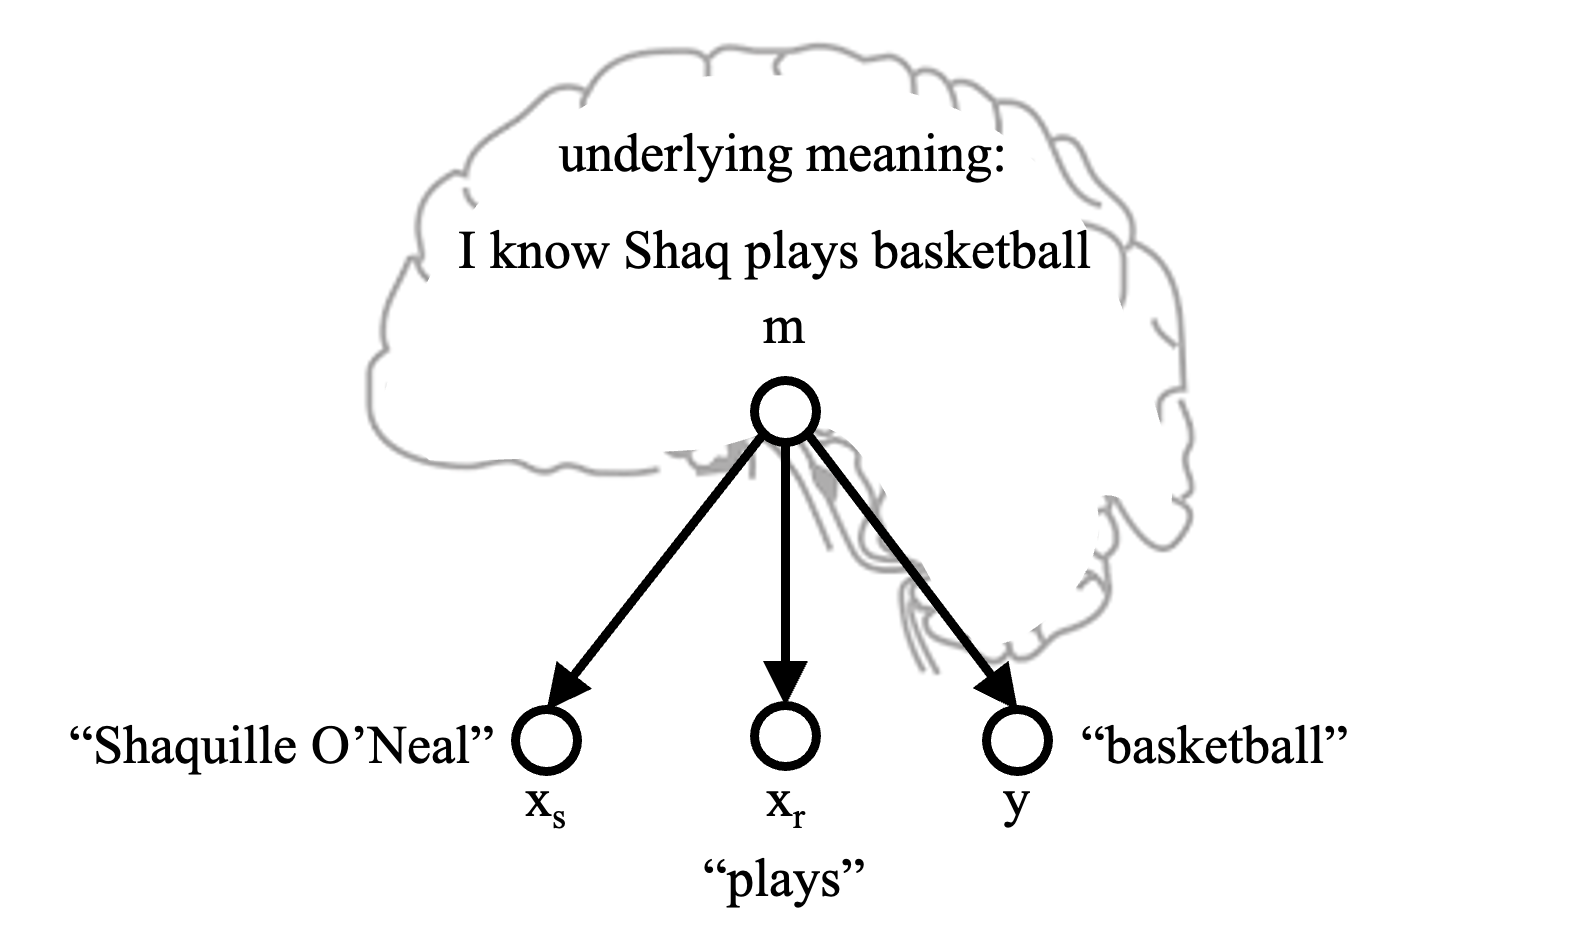 Simple graphical model incorporating meaning